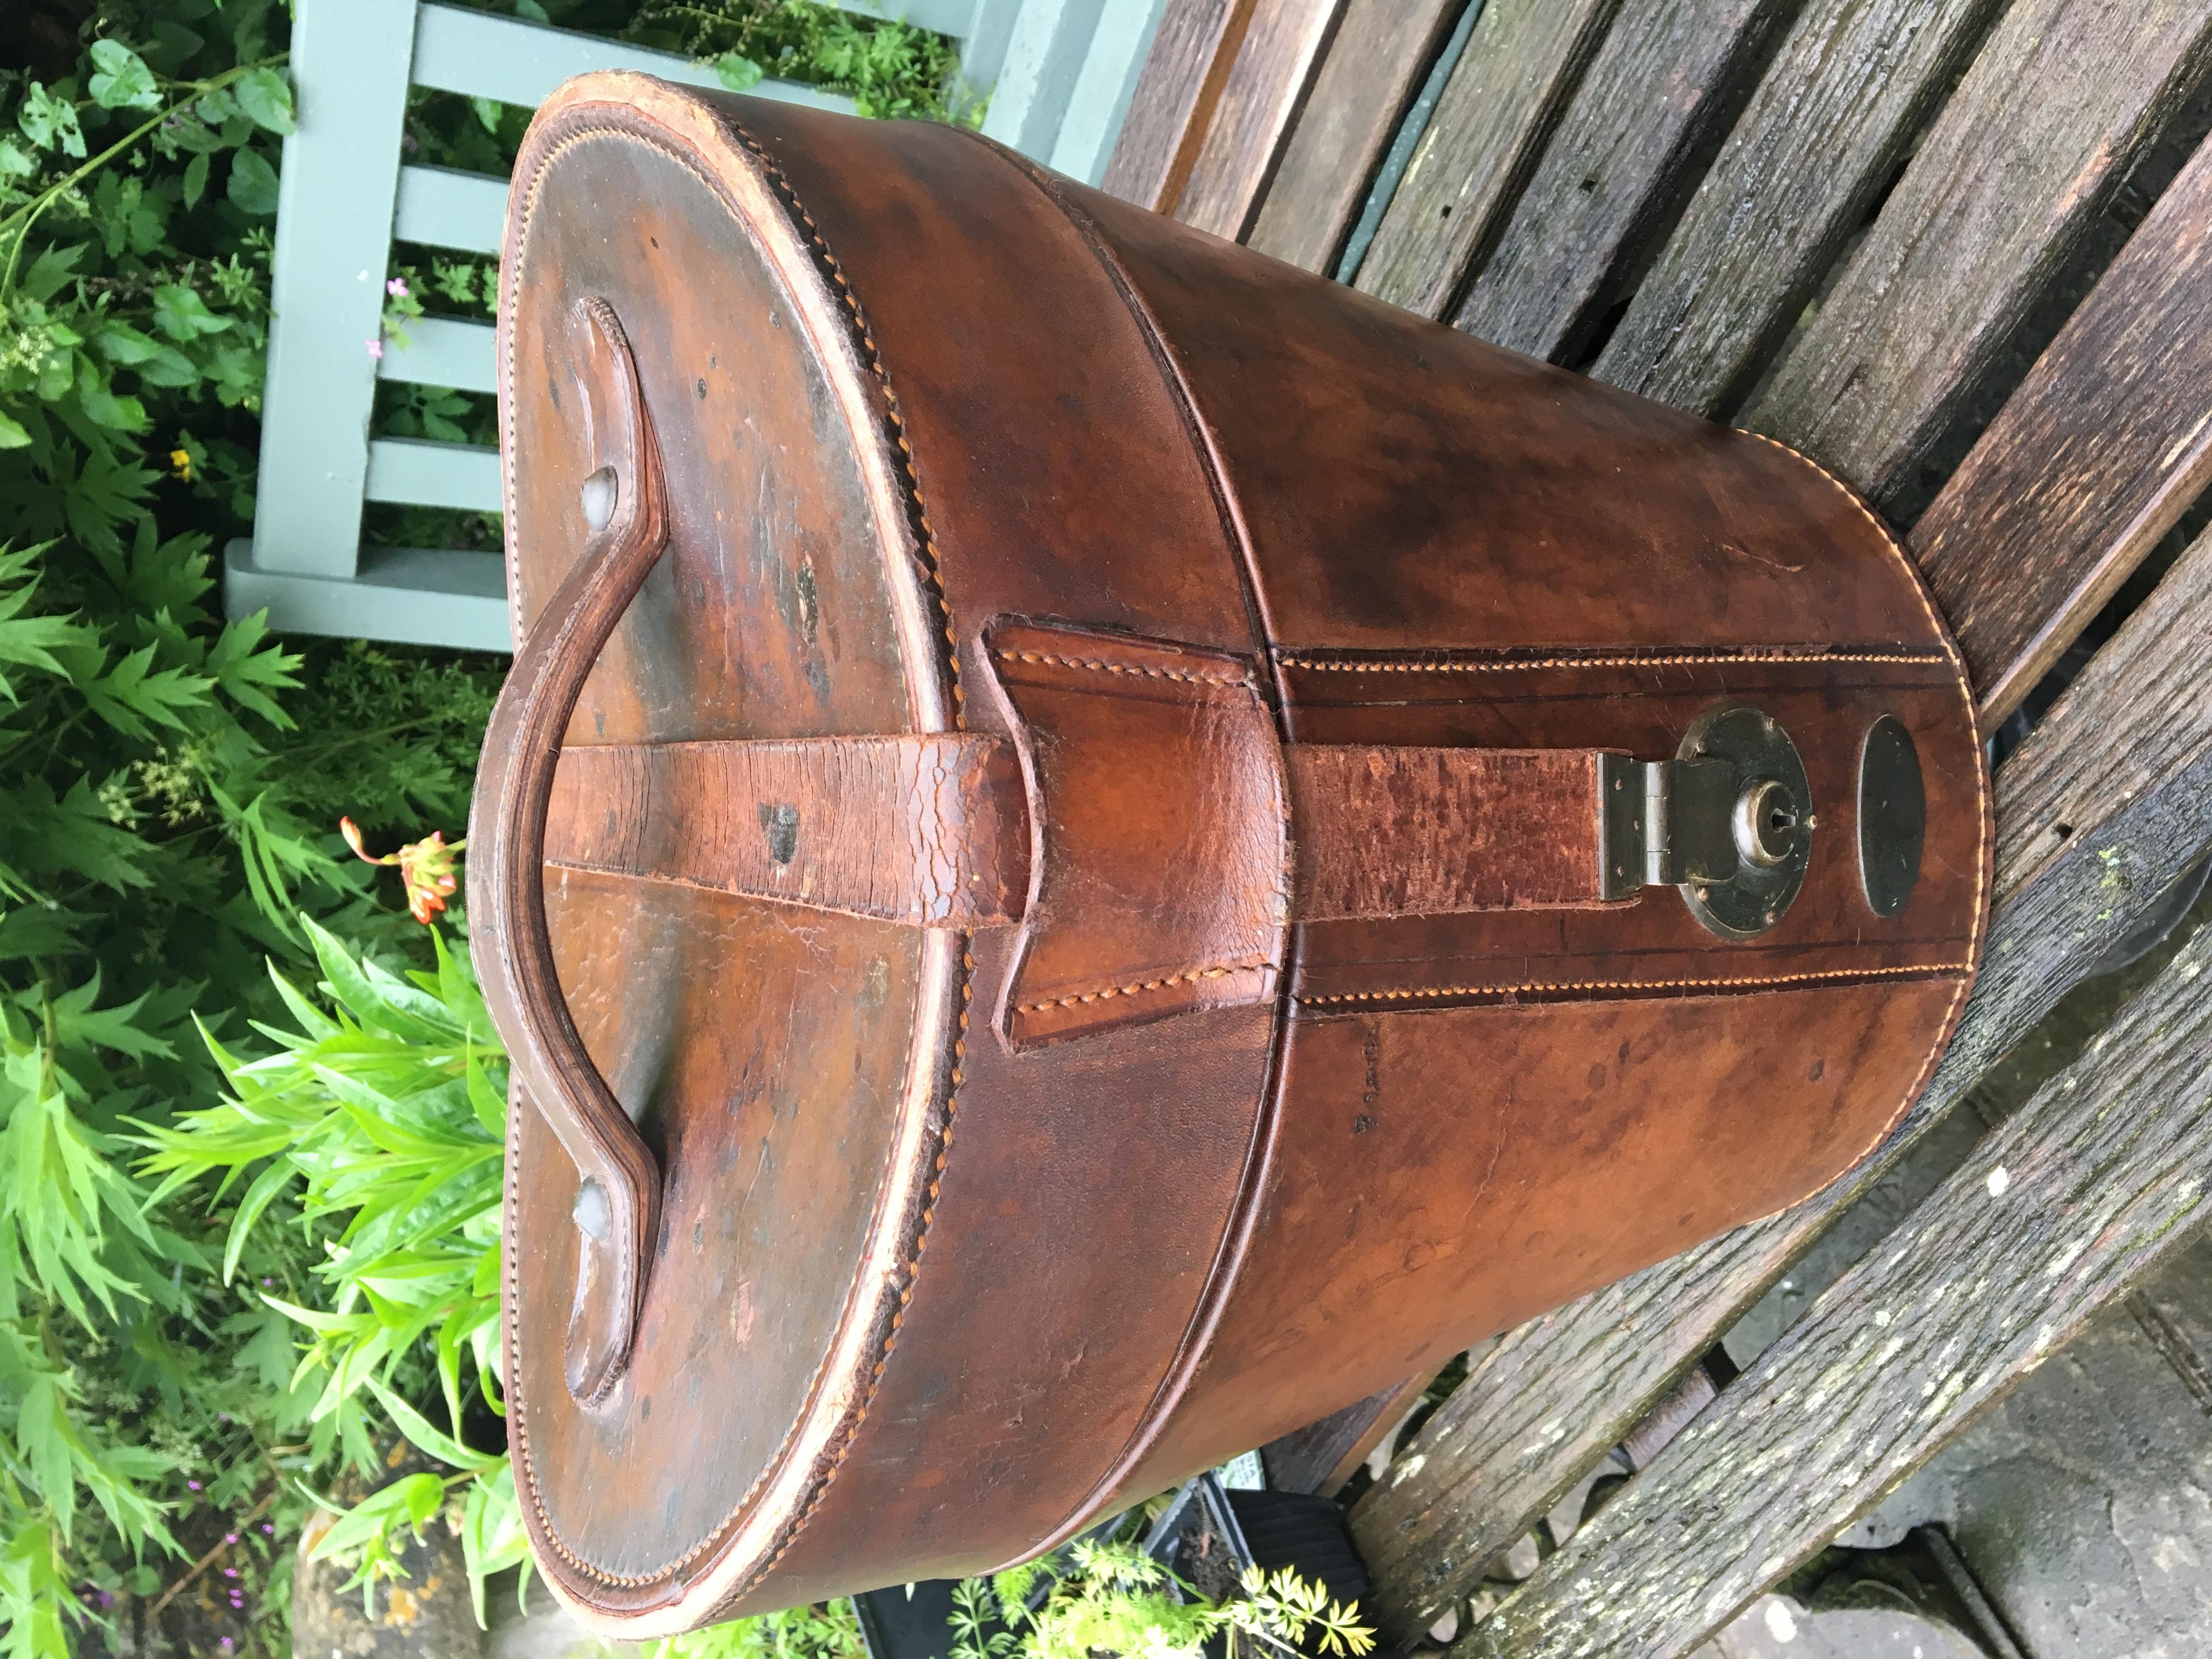 Fine quality top hat in its original leather case, supplied by 